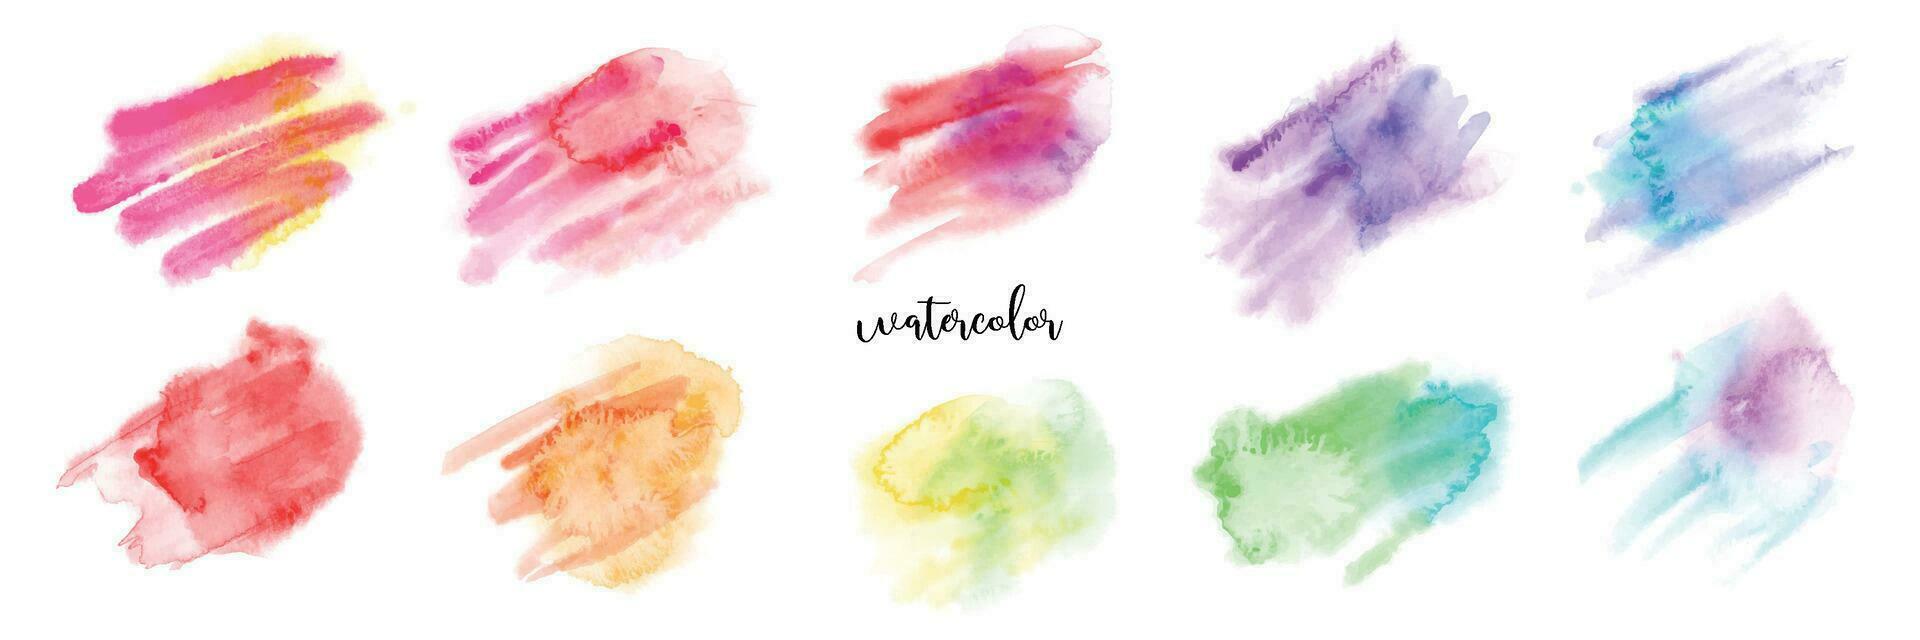 Hand drawn colorful watercolor paint brush set vector